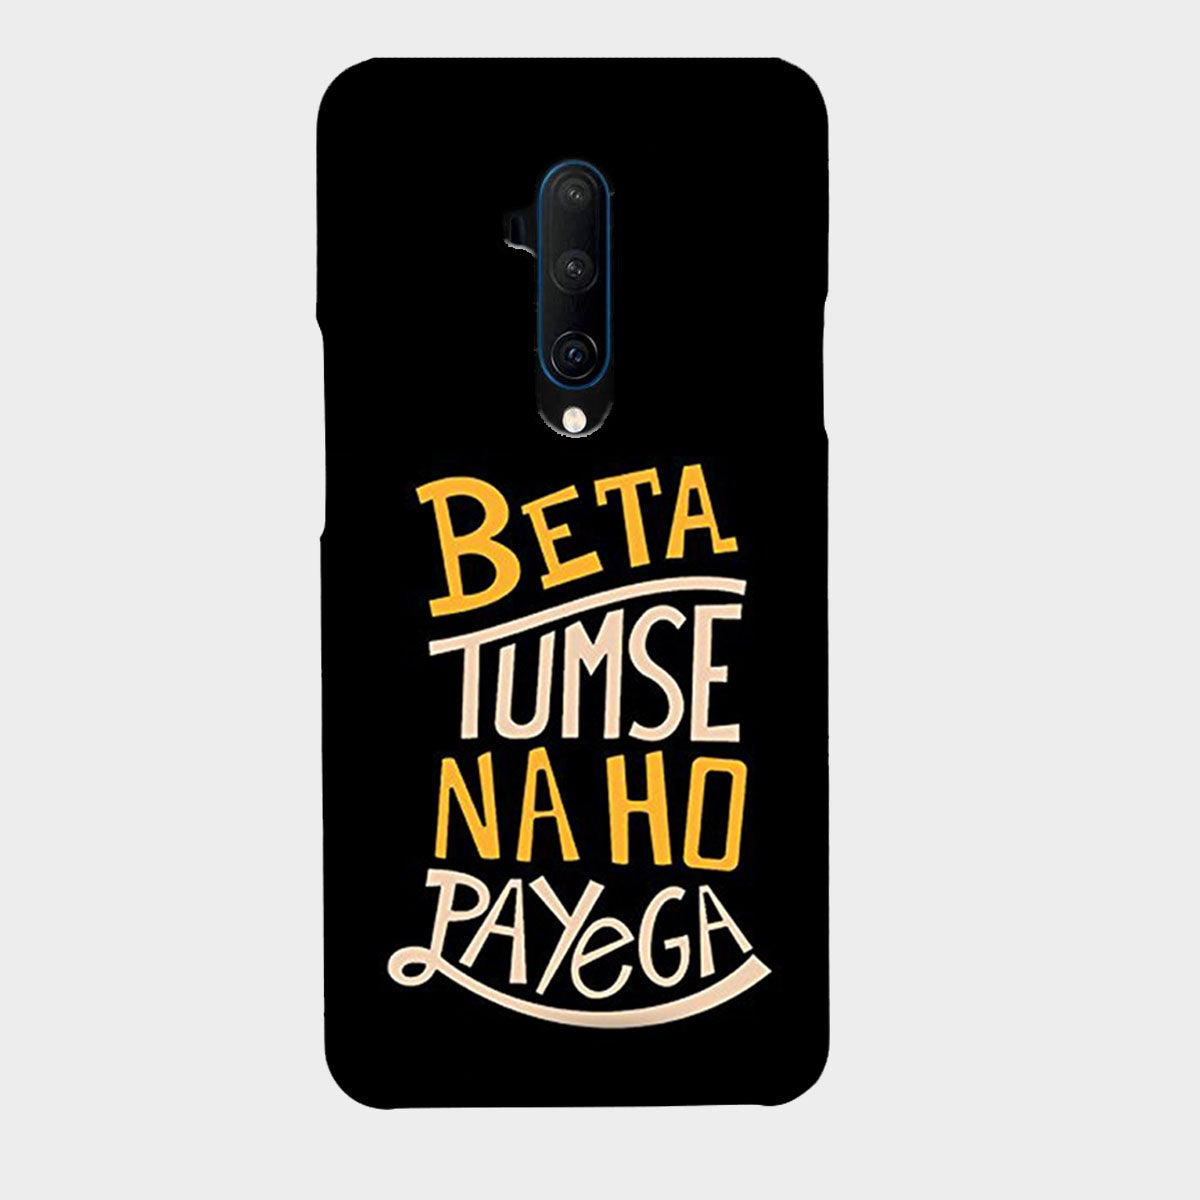 Beta Tumse Na Ho Paayega - Mobile Phone Cover - Hard Case - OnePlus